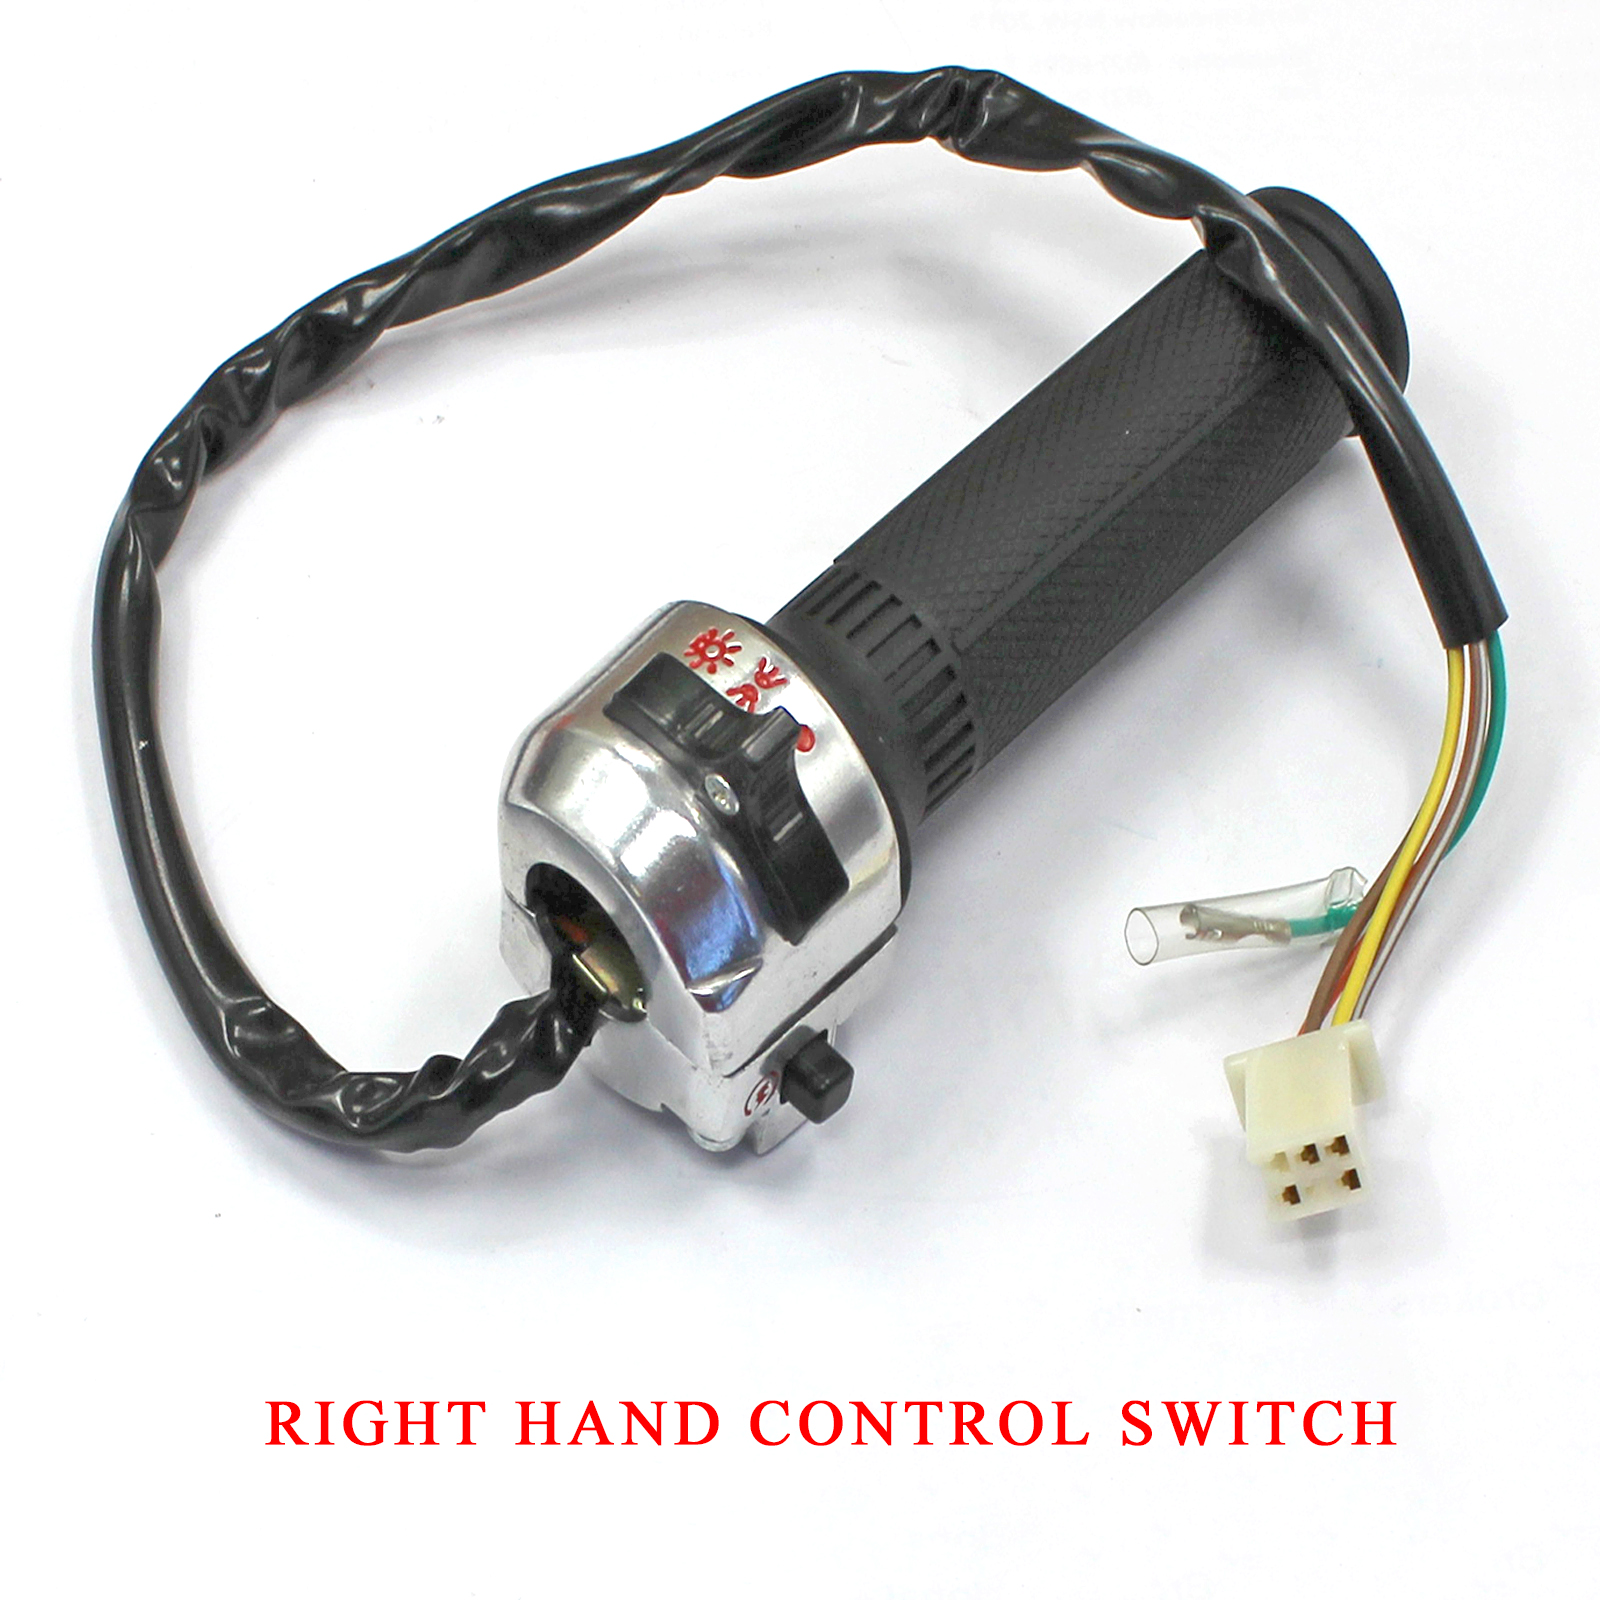 Details about  / FOR HONDA Z50 GORILLA MONKEY COMPLETE WIRING HARNESS ASSEMBLY CONTROL SWITCH